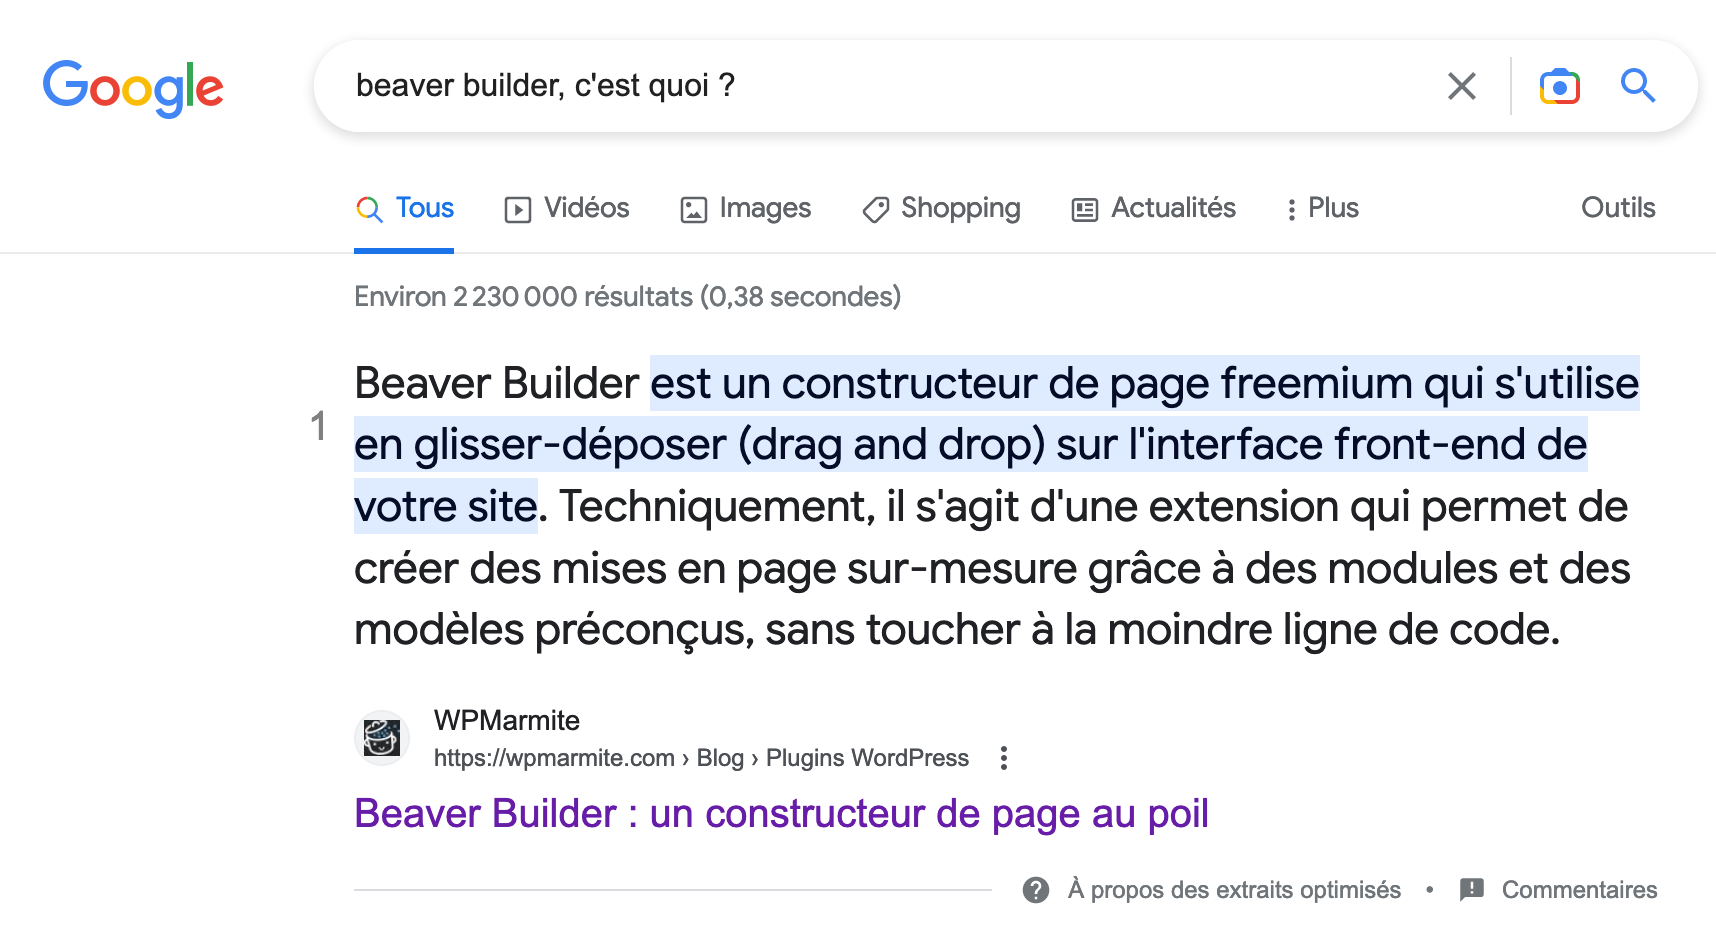 Travailler les featured snippet peut aider le SEO on-page.